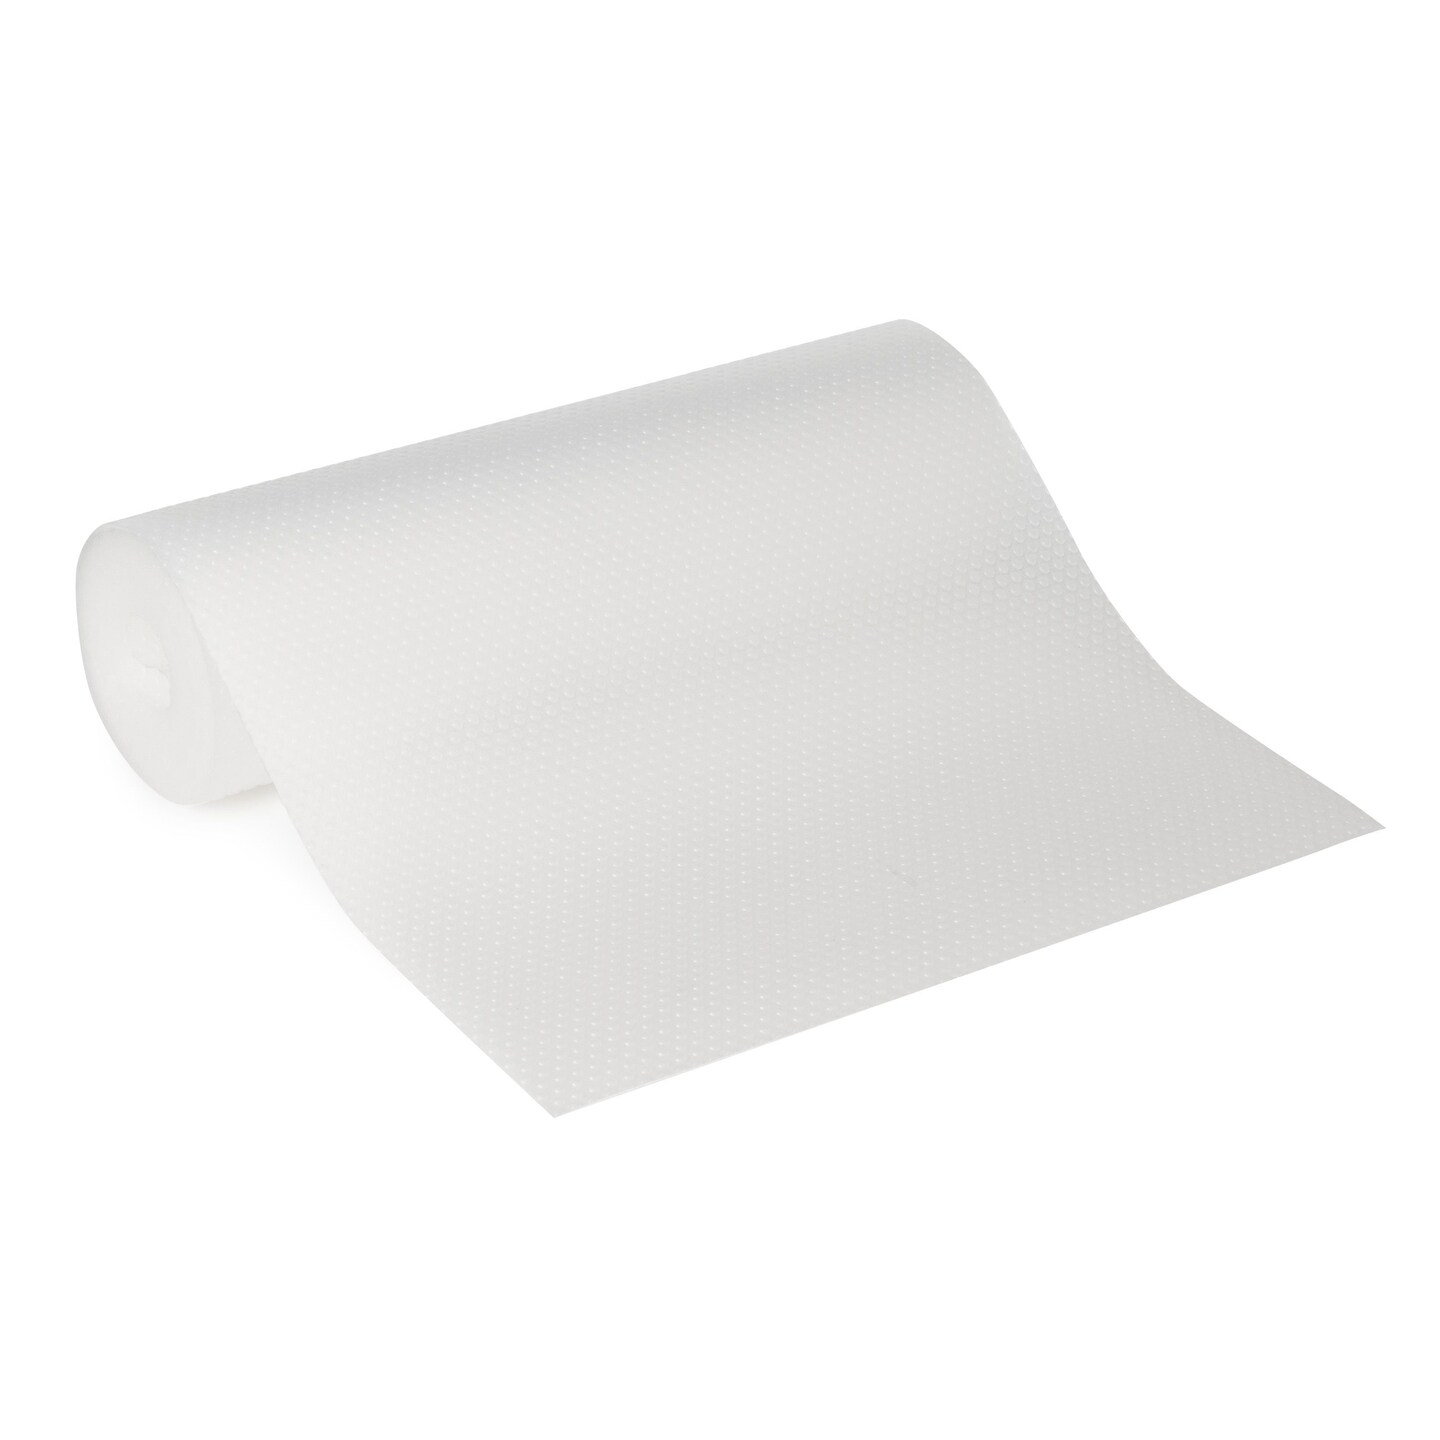 Non-adhesive Shelf Liners at